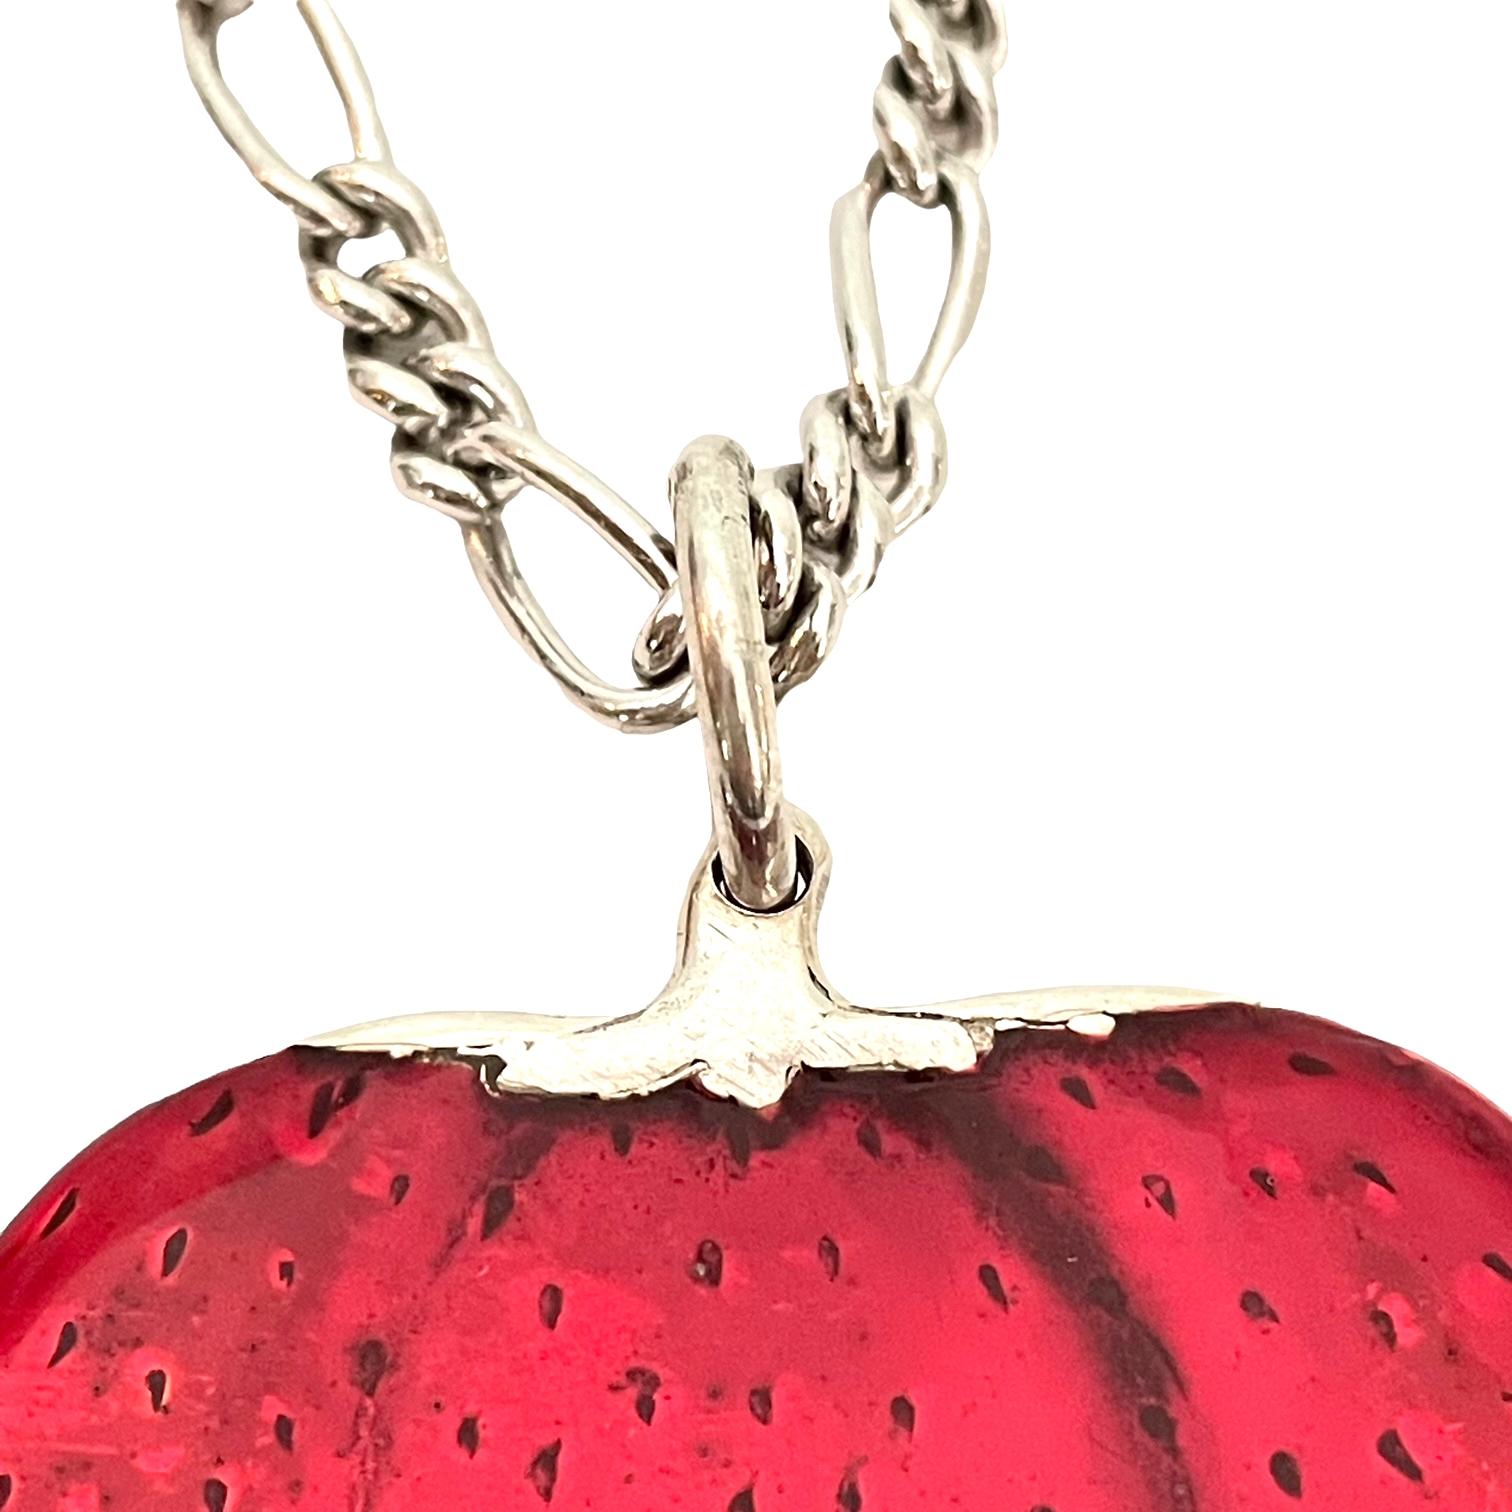 The strawberry pendant is 2.25